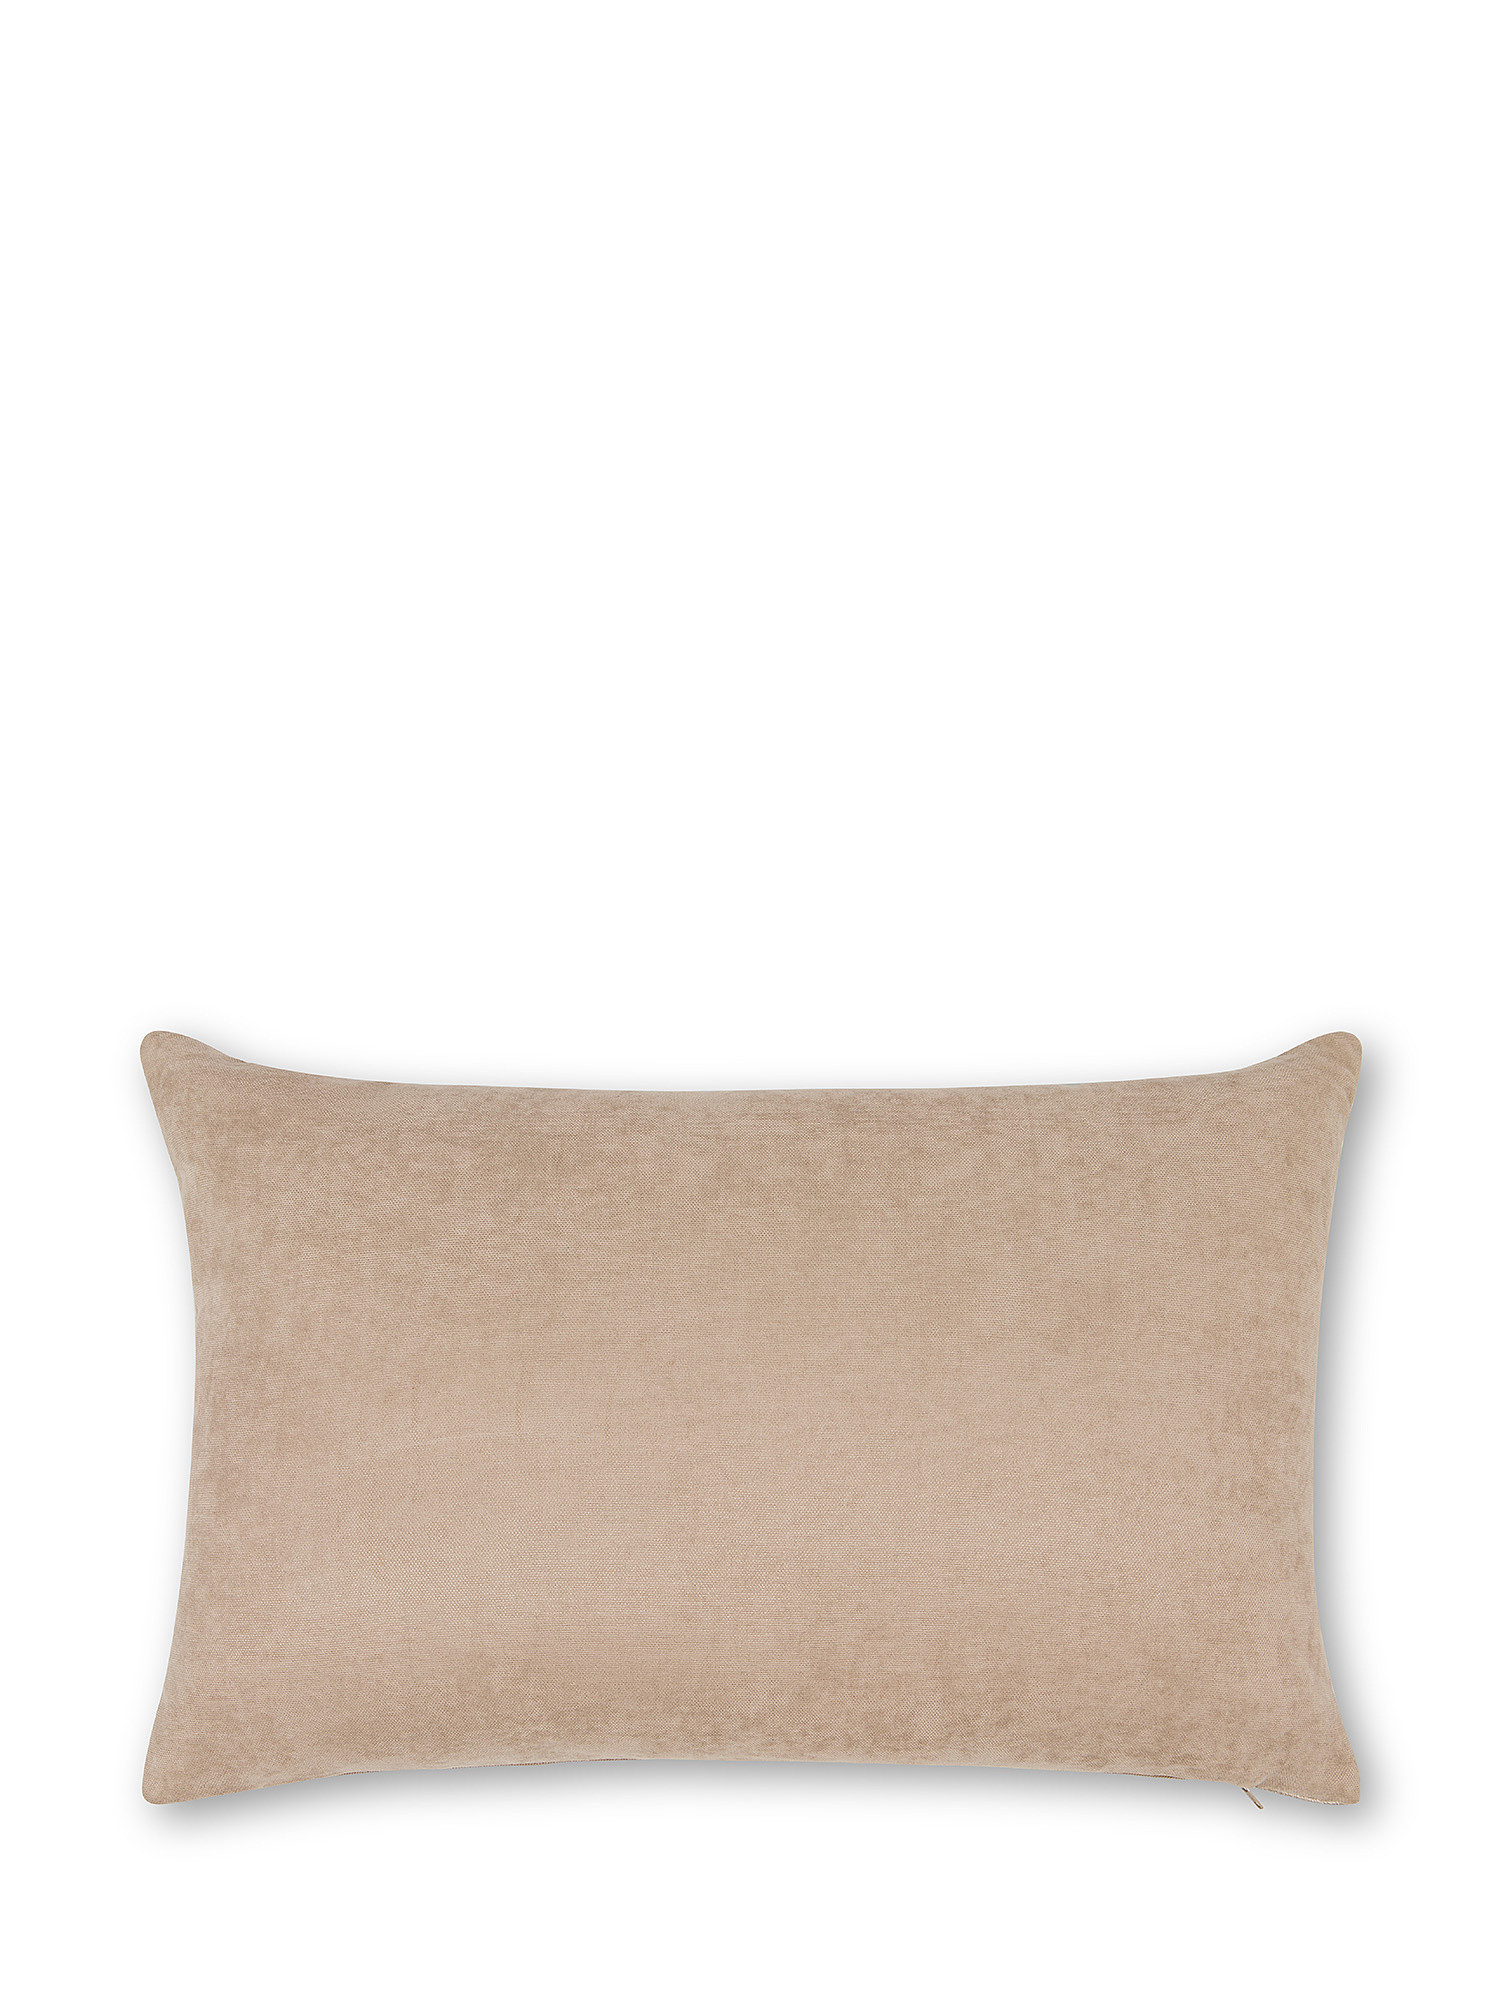 Cuscino 35x55 cm in cotone e lino, Beige, large image number 1